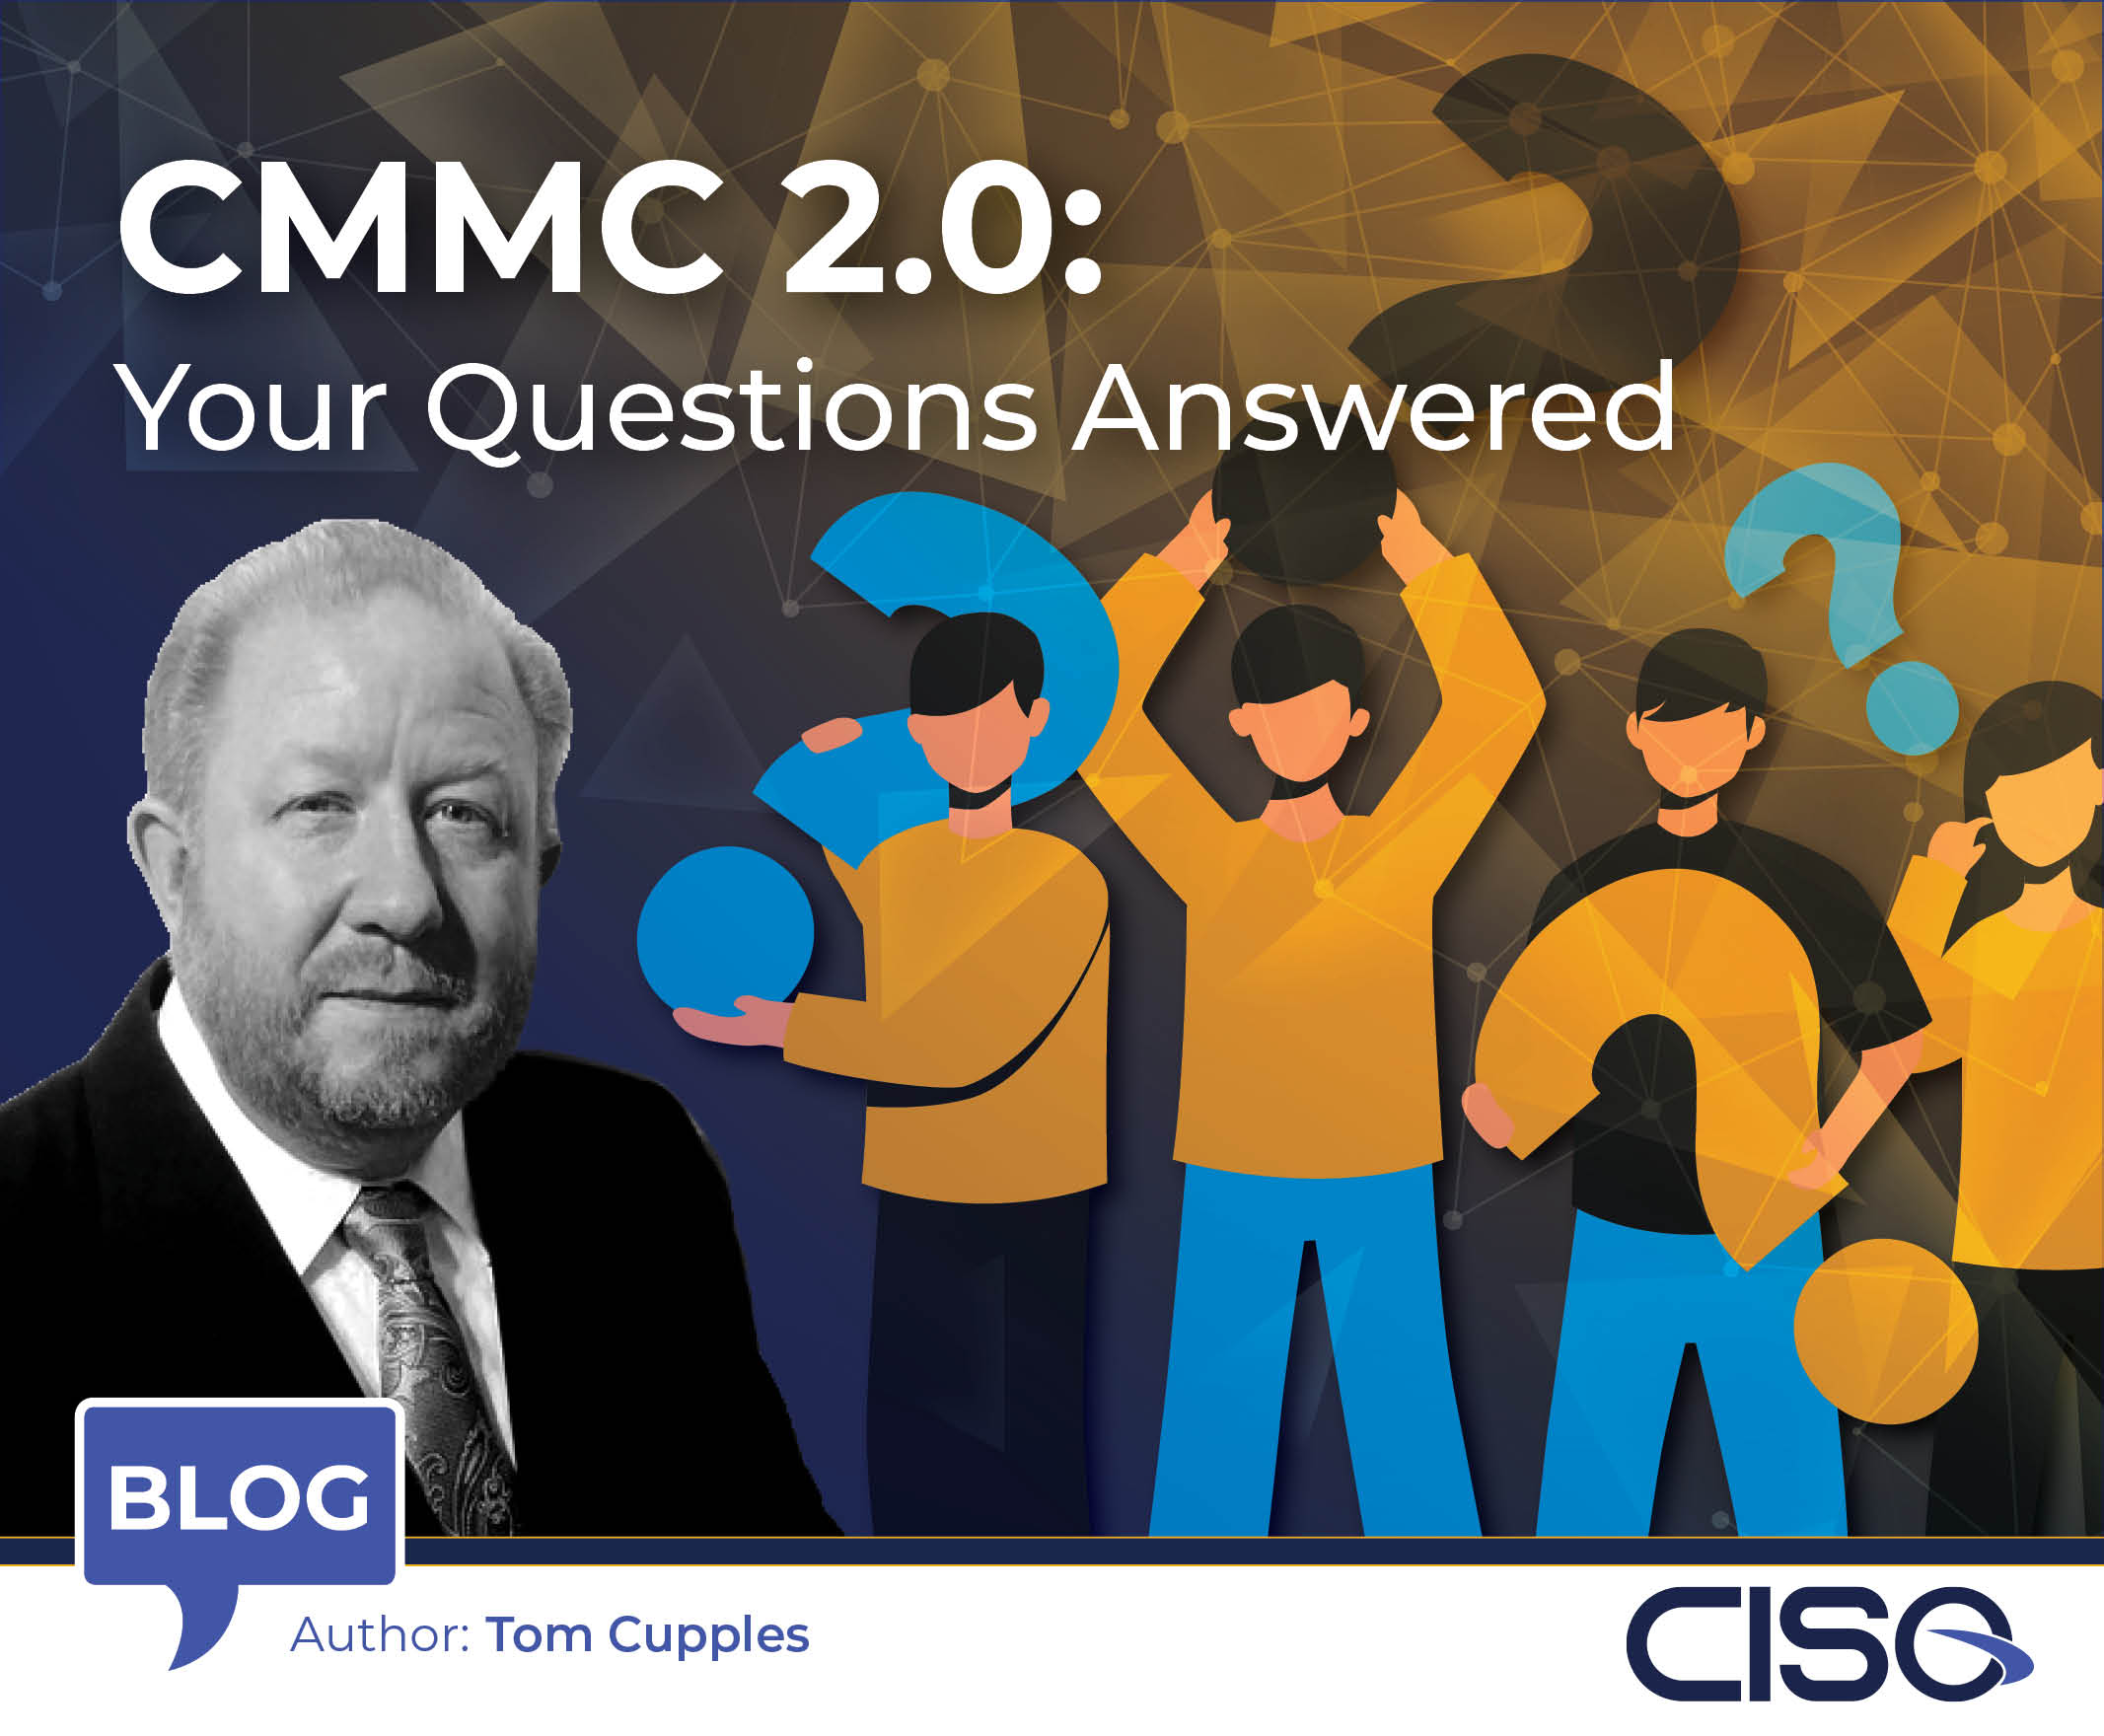 CMMC 2.0: Your Questions Answered